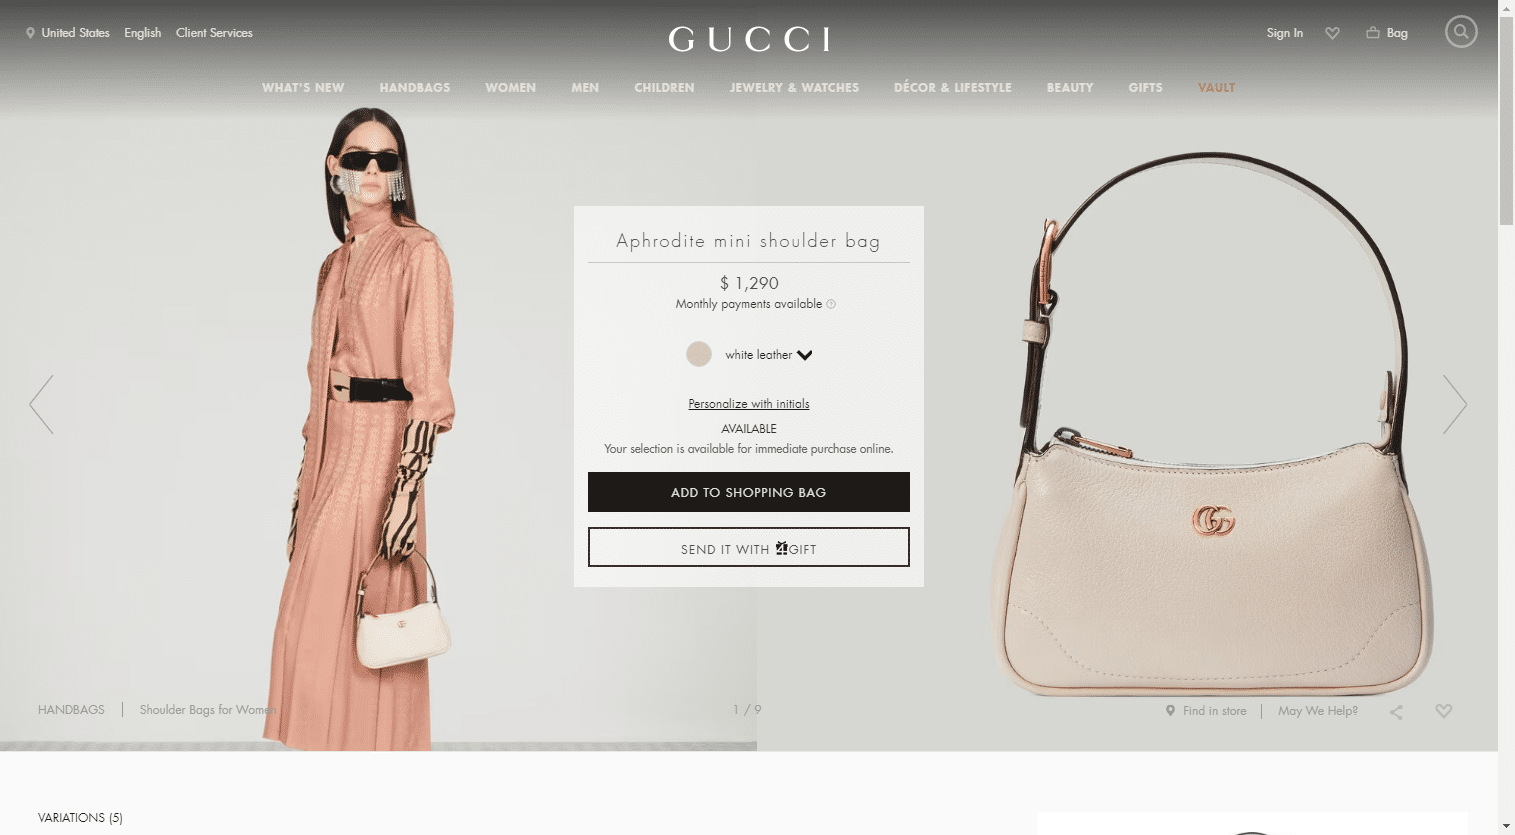 Aphrodite-mini-shoulder-bag-in-white-leather-GUCCI-US.png